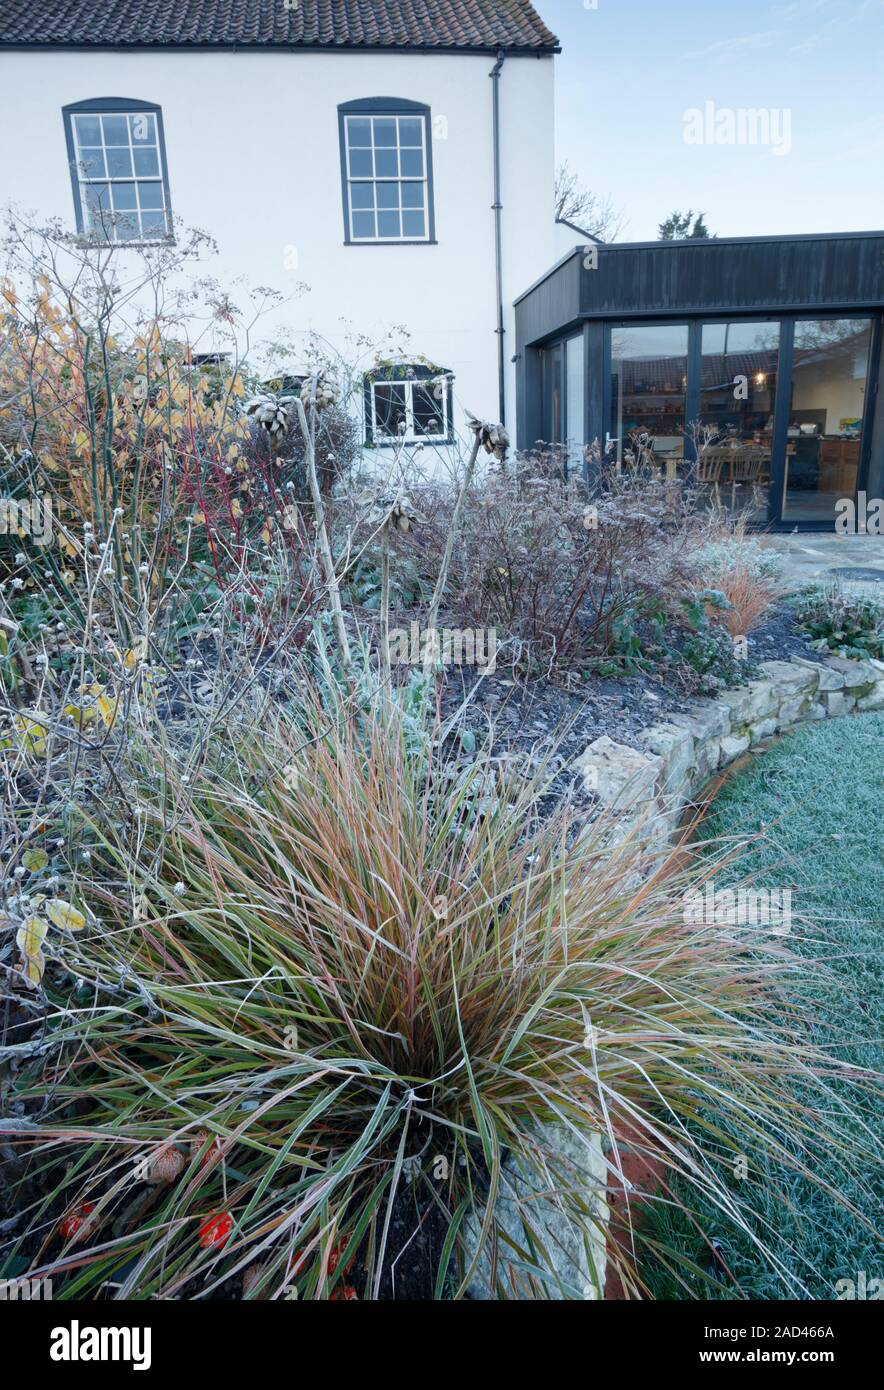 Herbaceous border in garden of a listed period house with modern extension, on a frosty winter morning. Bristol. UK. Ornamental grass in foreground is Stock Photo